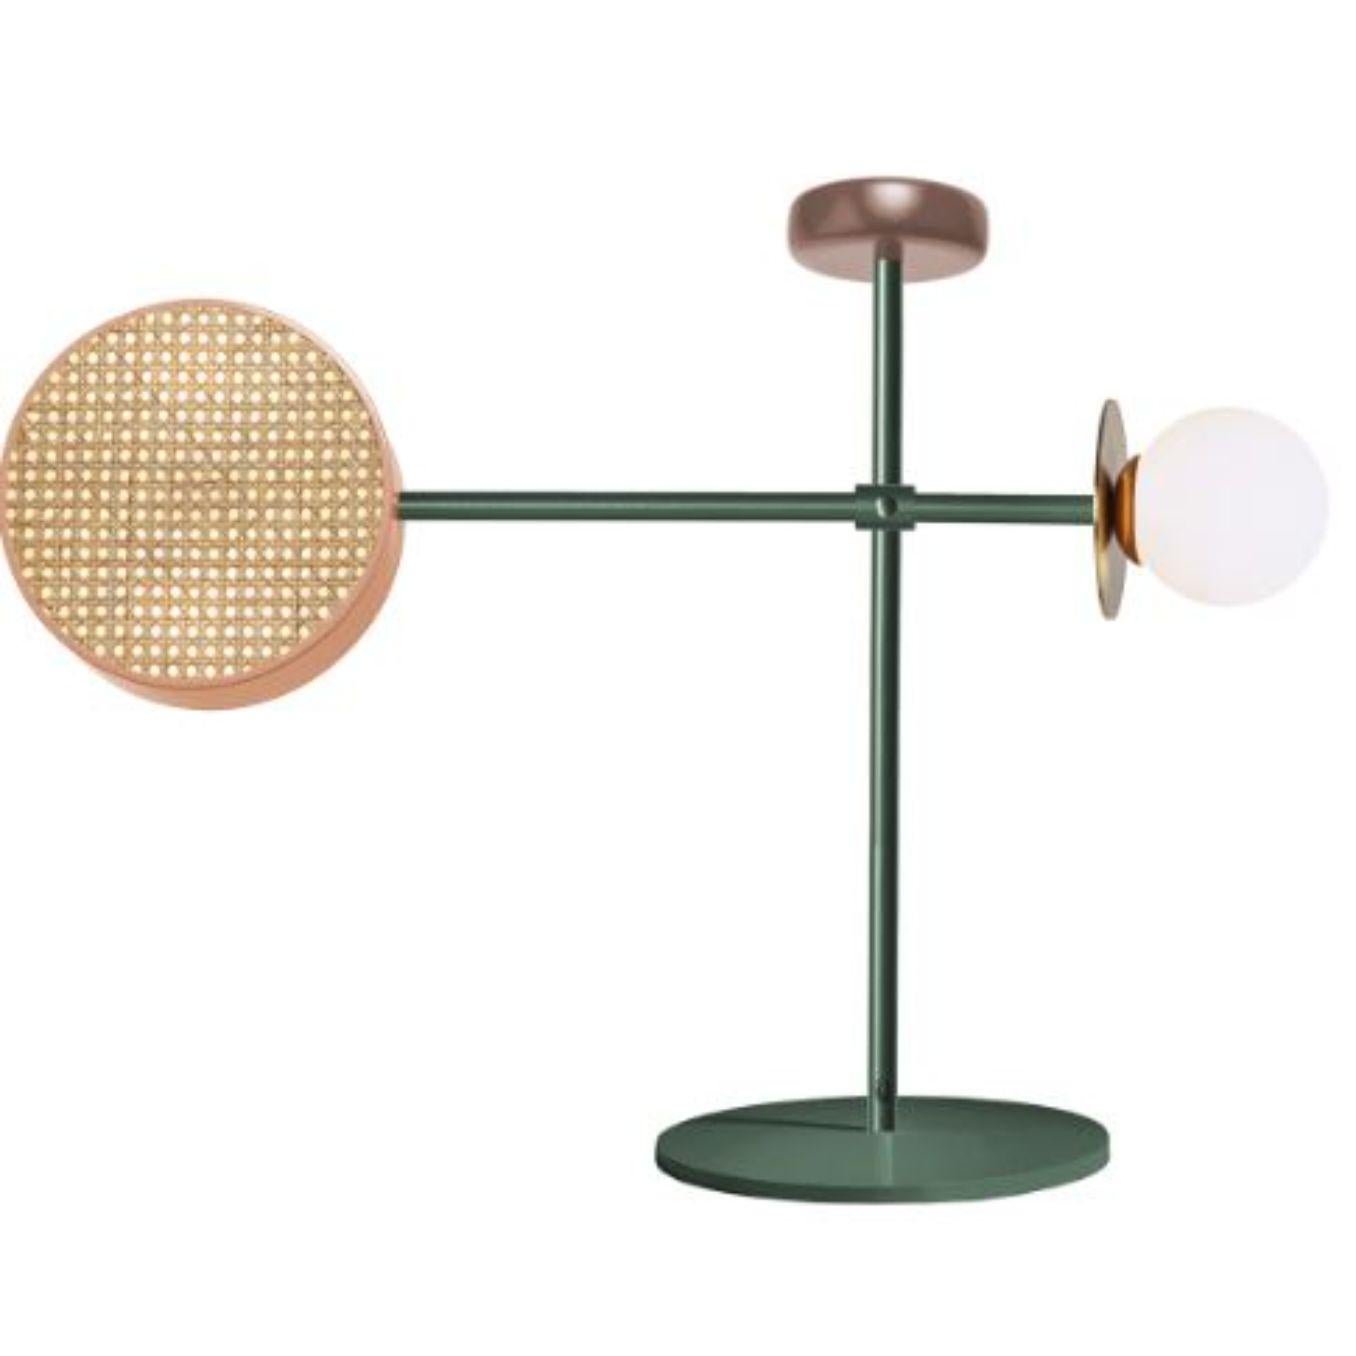 Monaco table II lamp by Dooq
Dimensions: W 65 x D 25 x H 75 cm
Materials: lacquered metal, brass/nickel, rattan and wood spheres.

Information:
230V/50Hz
3 x max. G9
4W LED

120V/60Hz
3 x max. G9
4W LED

Cable: 59”/1,5m

All our lamps